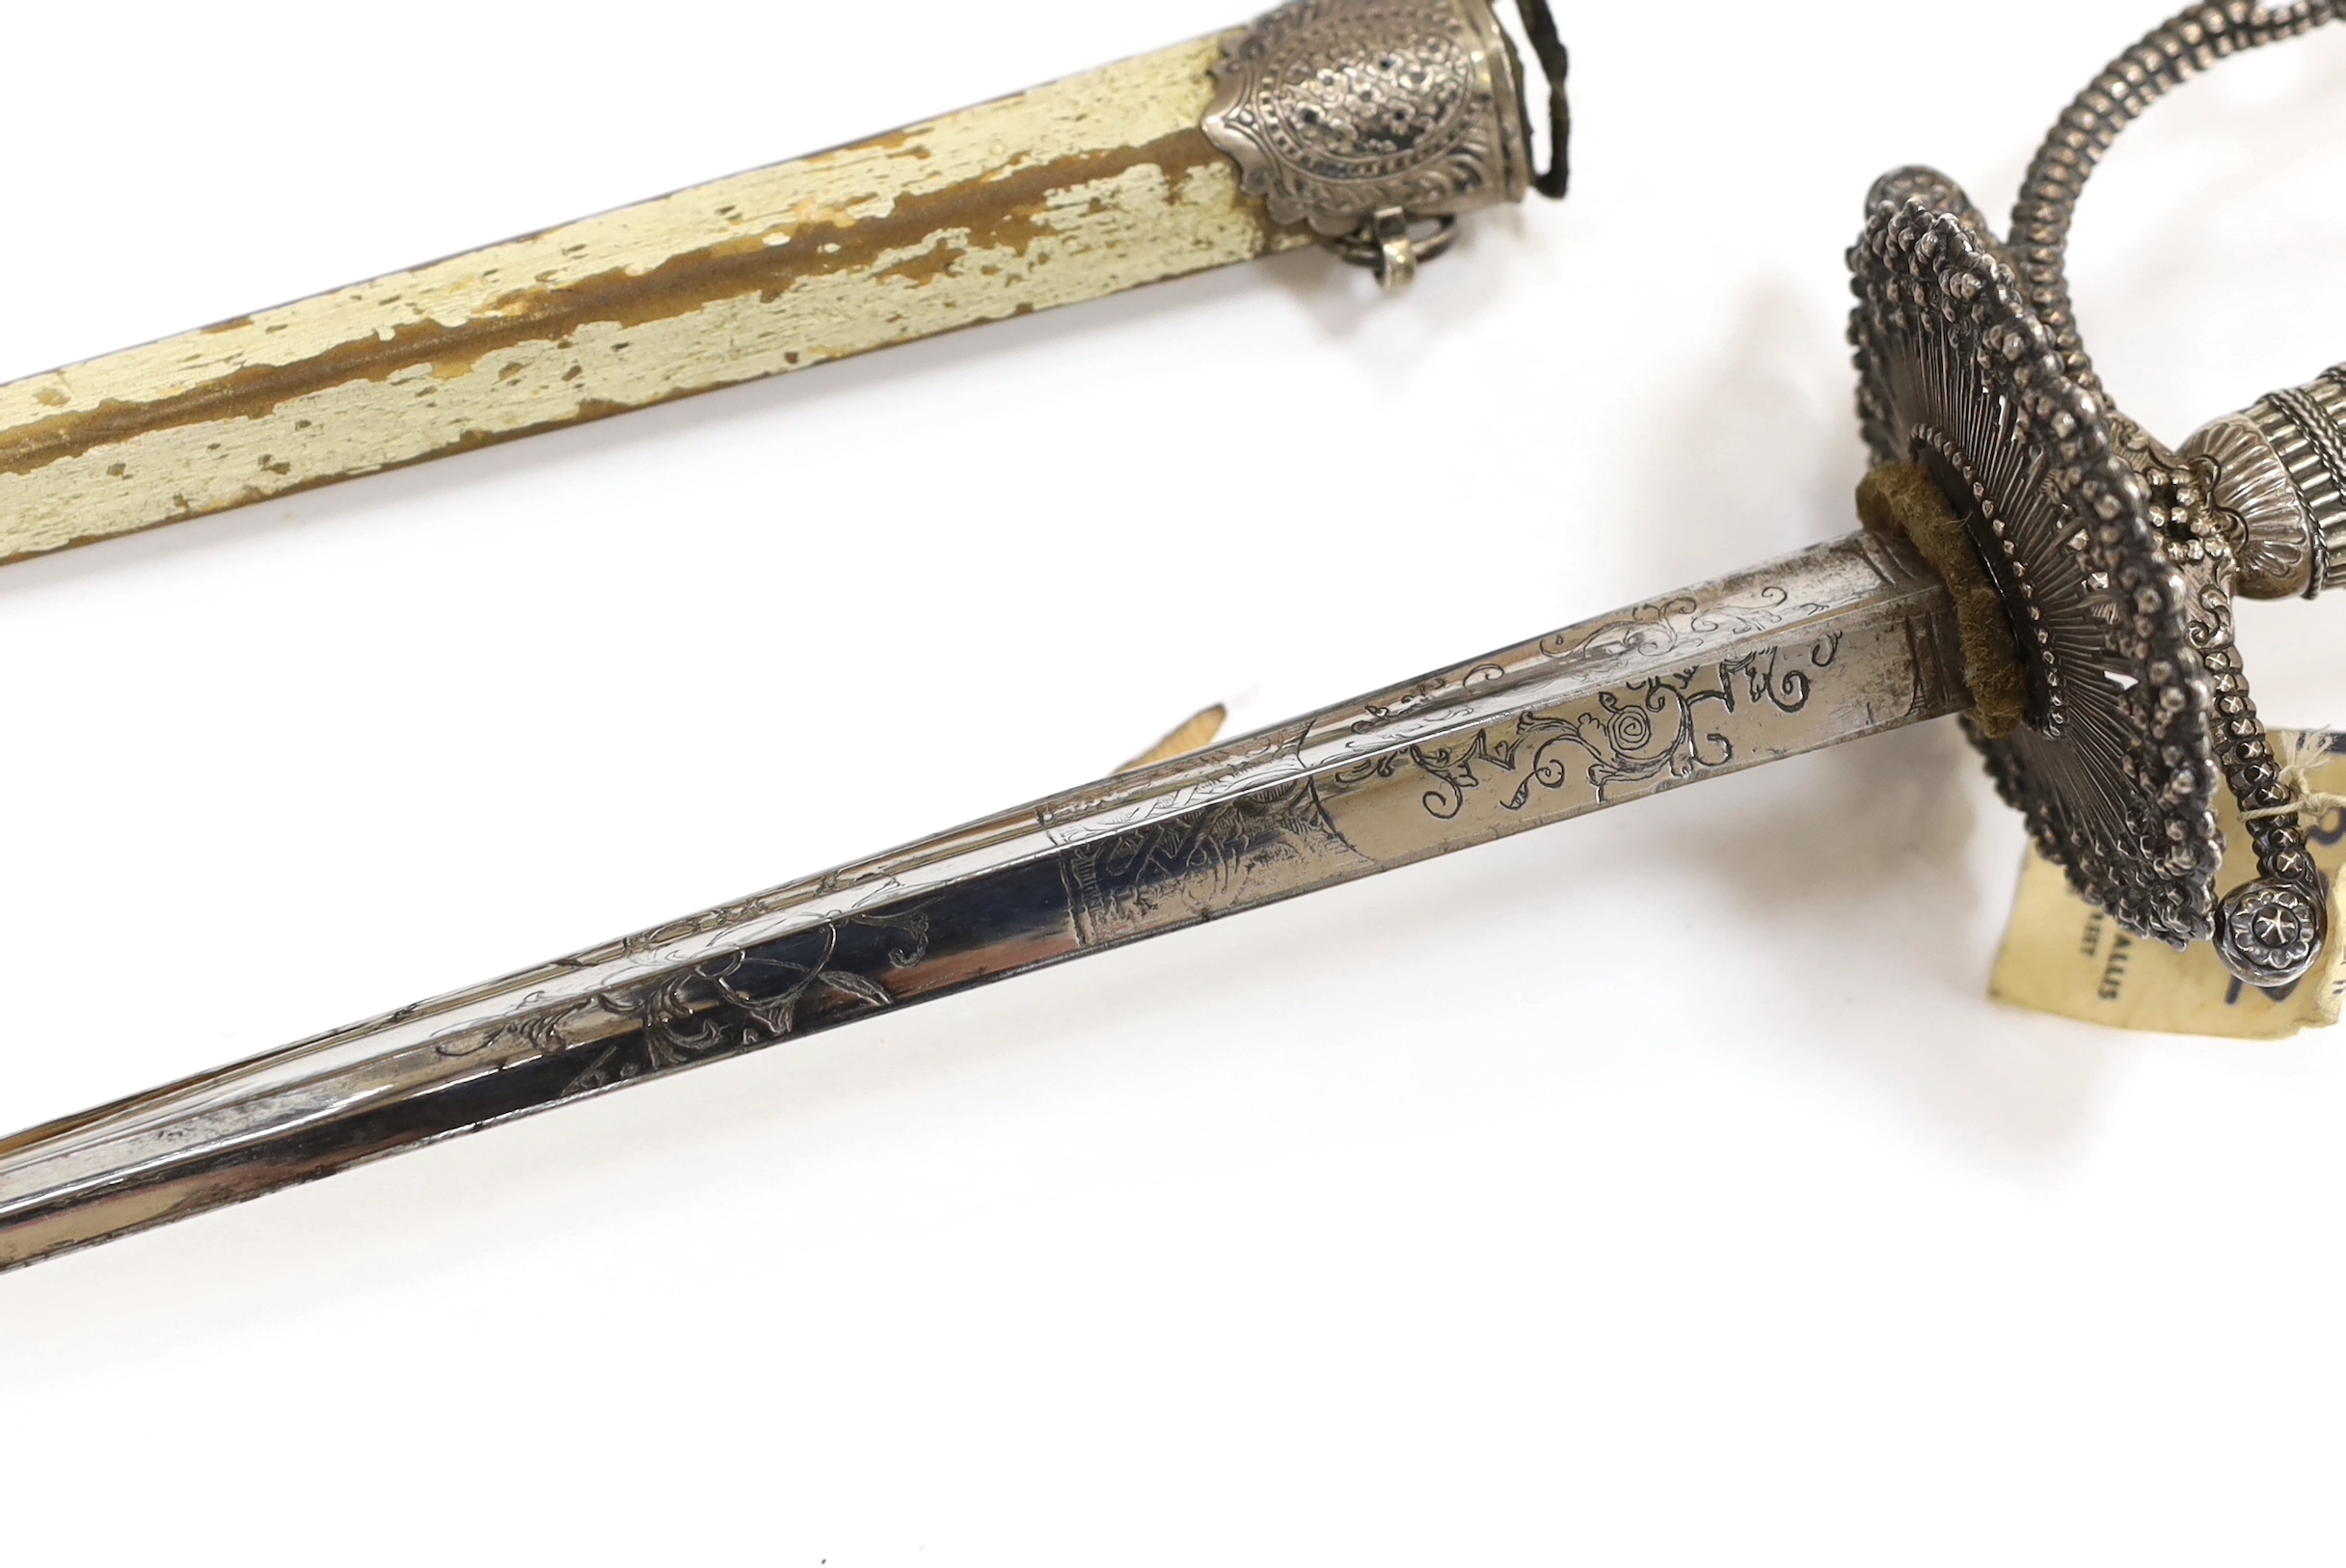 An English small sword, c.1775, pierced with facetted stud work, silver tape and wire bound grip, triangular section etched blade, in its original vellum scabbard and silver mounts, top mount engraved Dieltry Royal Excha